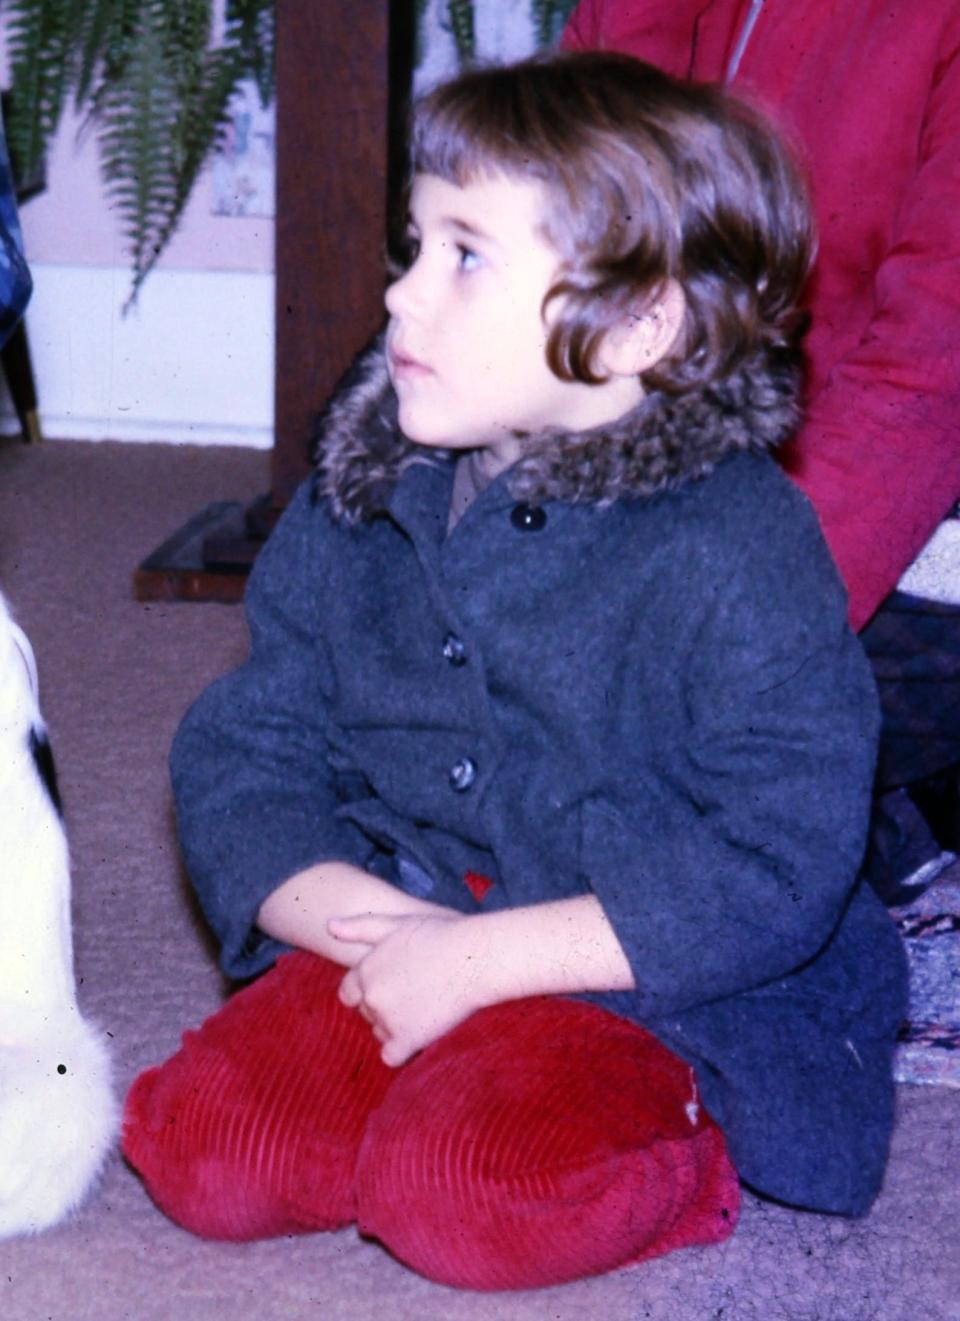 Janet Meckstroth Alessi, pictured here at age 3, says she was shy and introverted even as a young child.